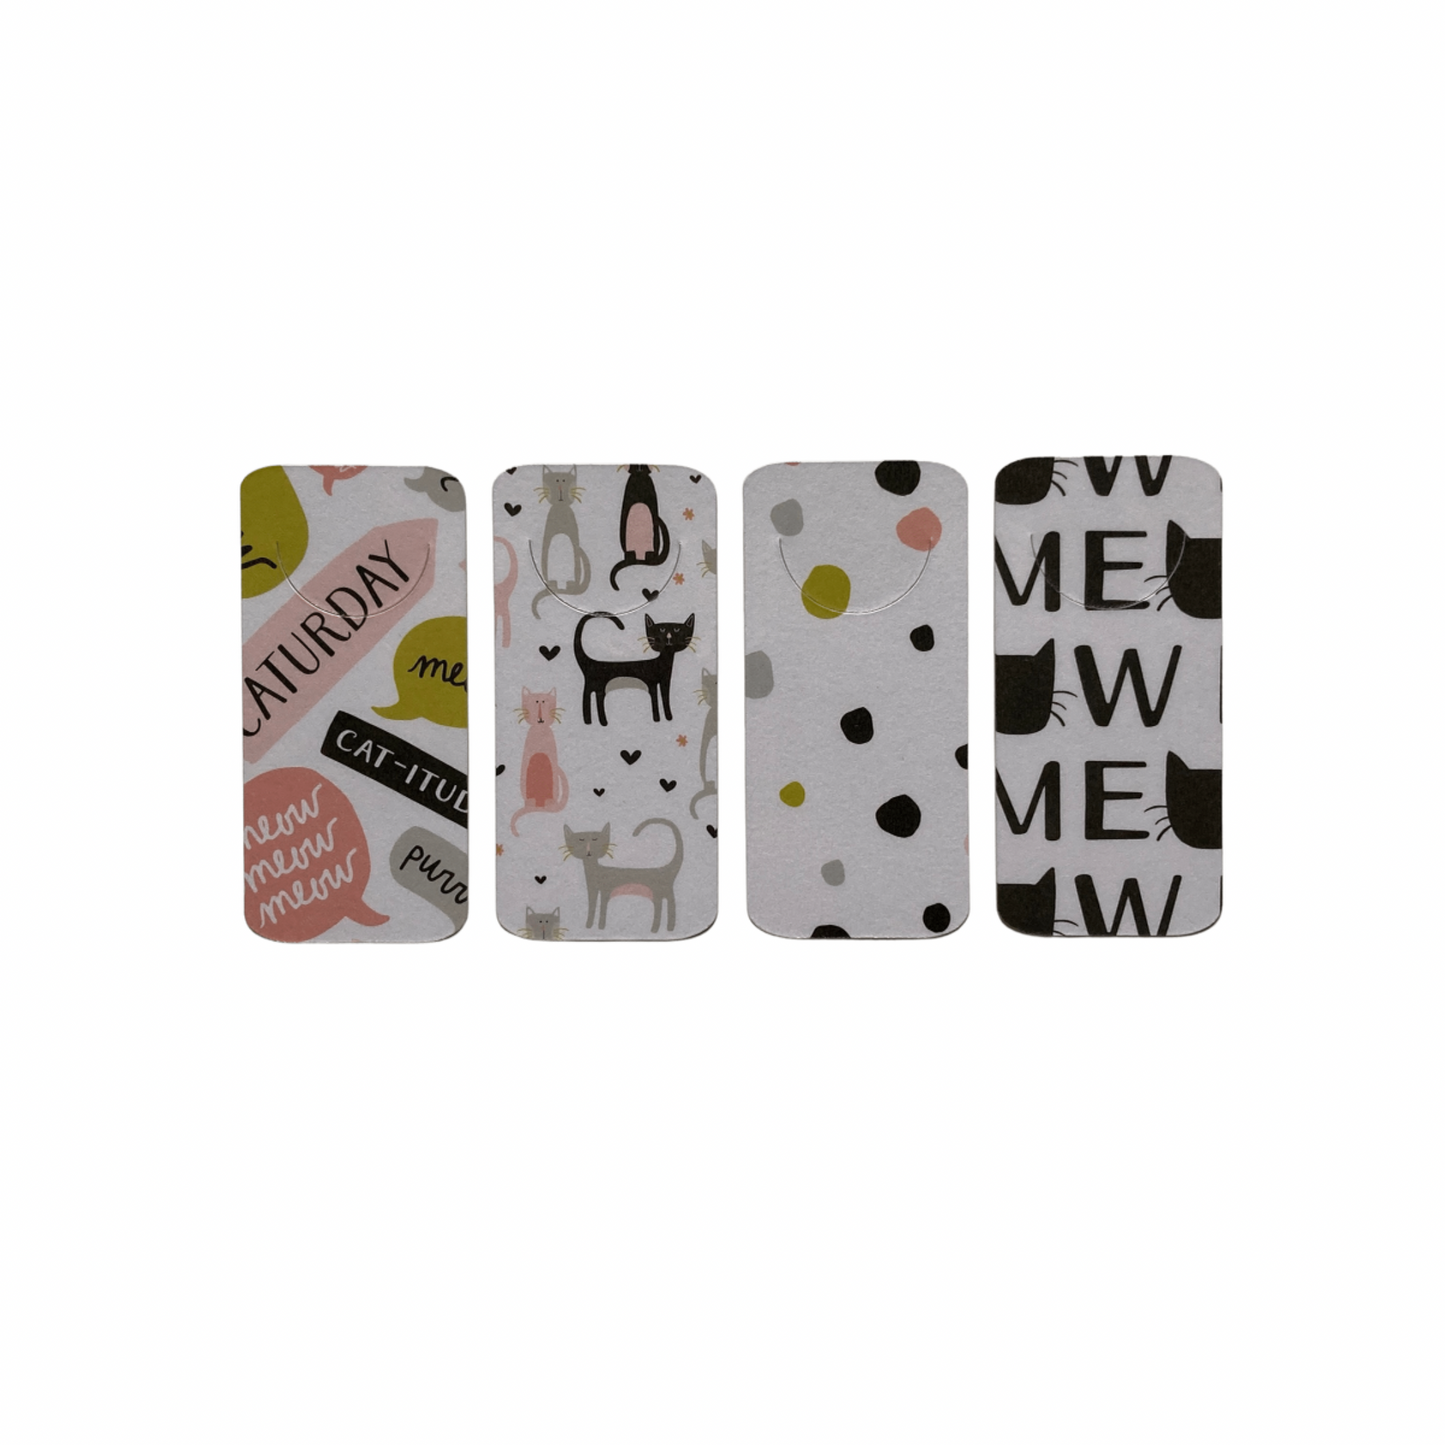 4-Pack Caturday Bookmarks